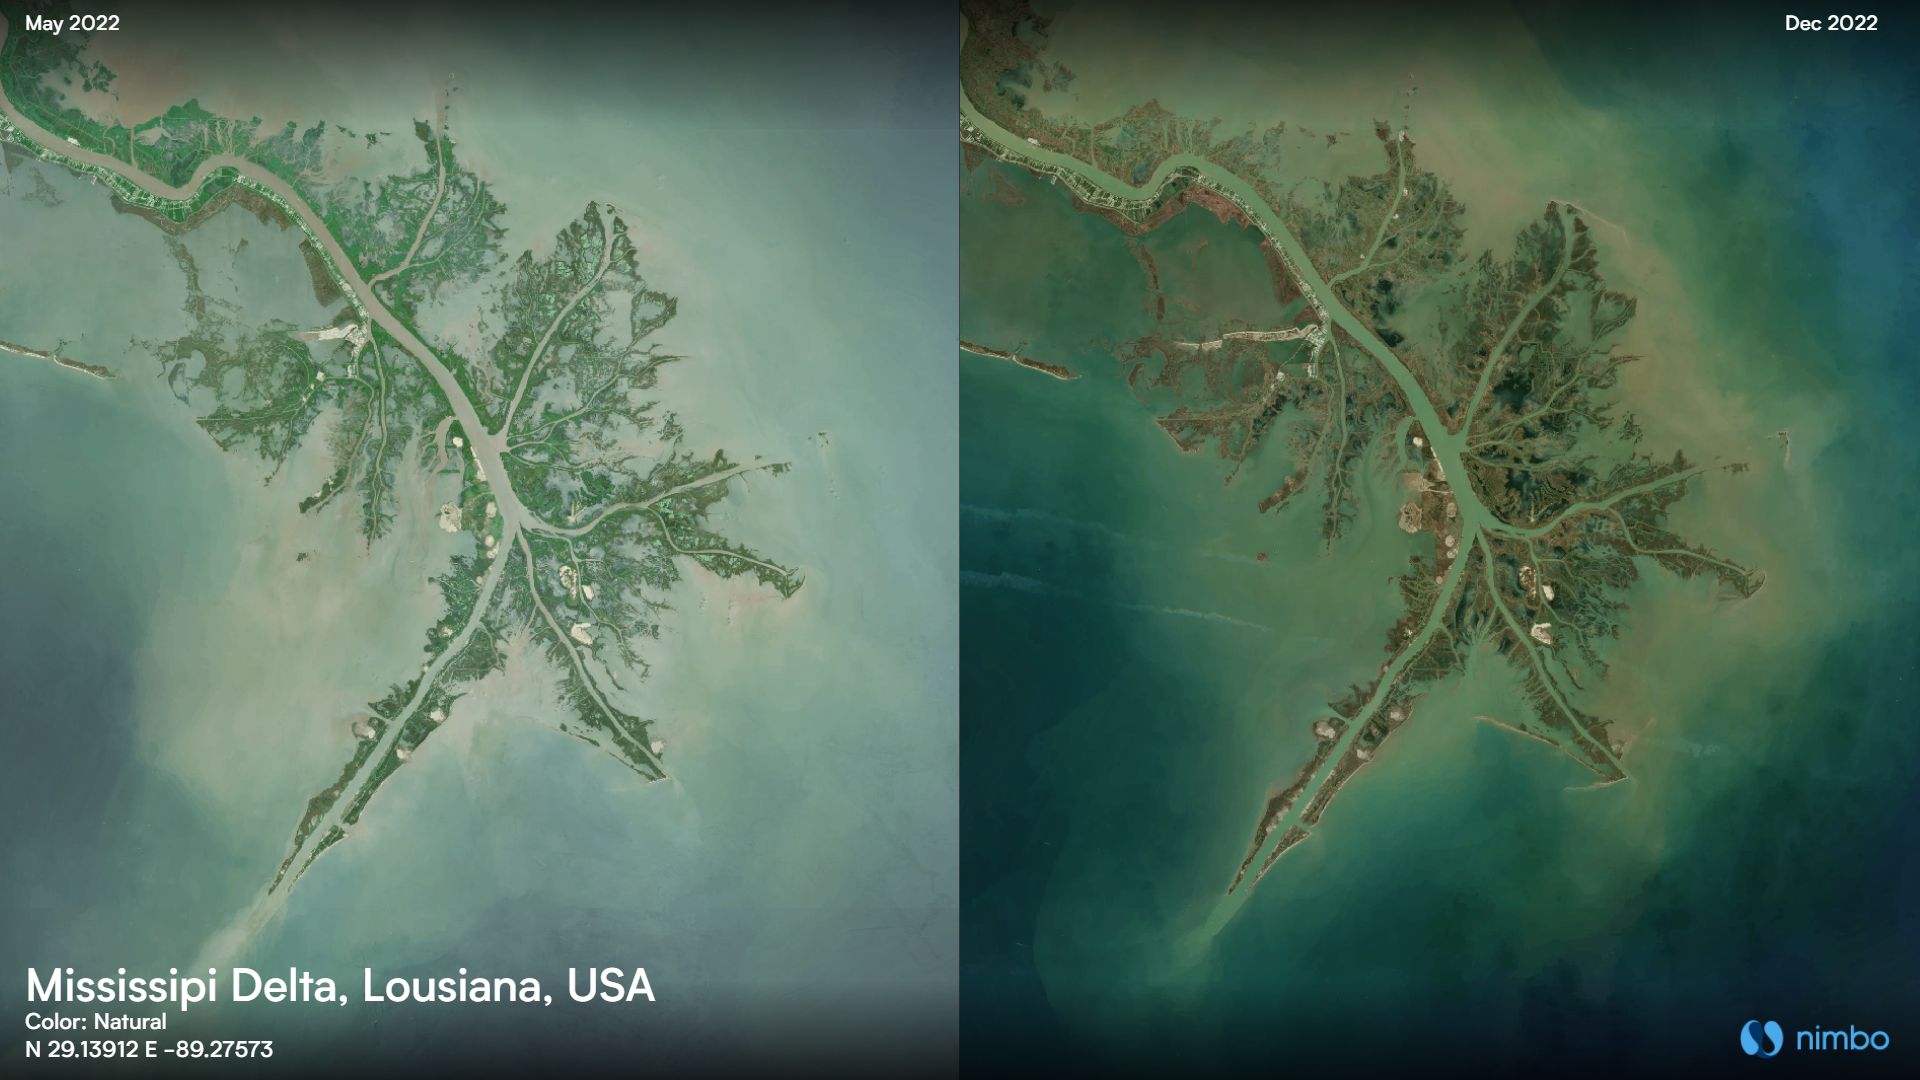 The Mississipi Delta see from space in May 2022 compared with December 2022